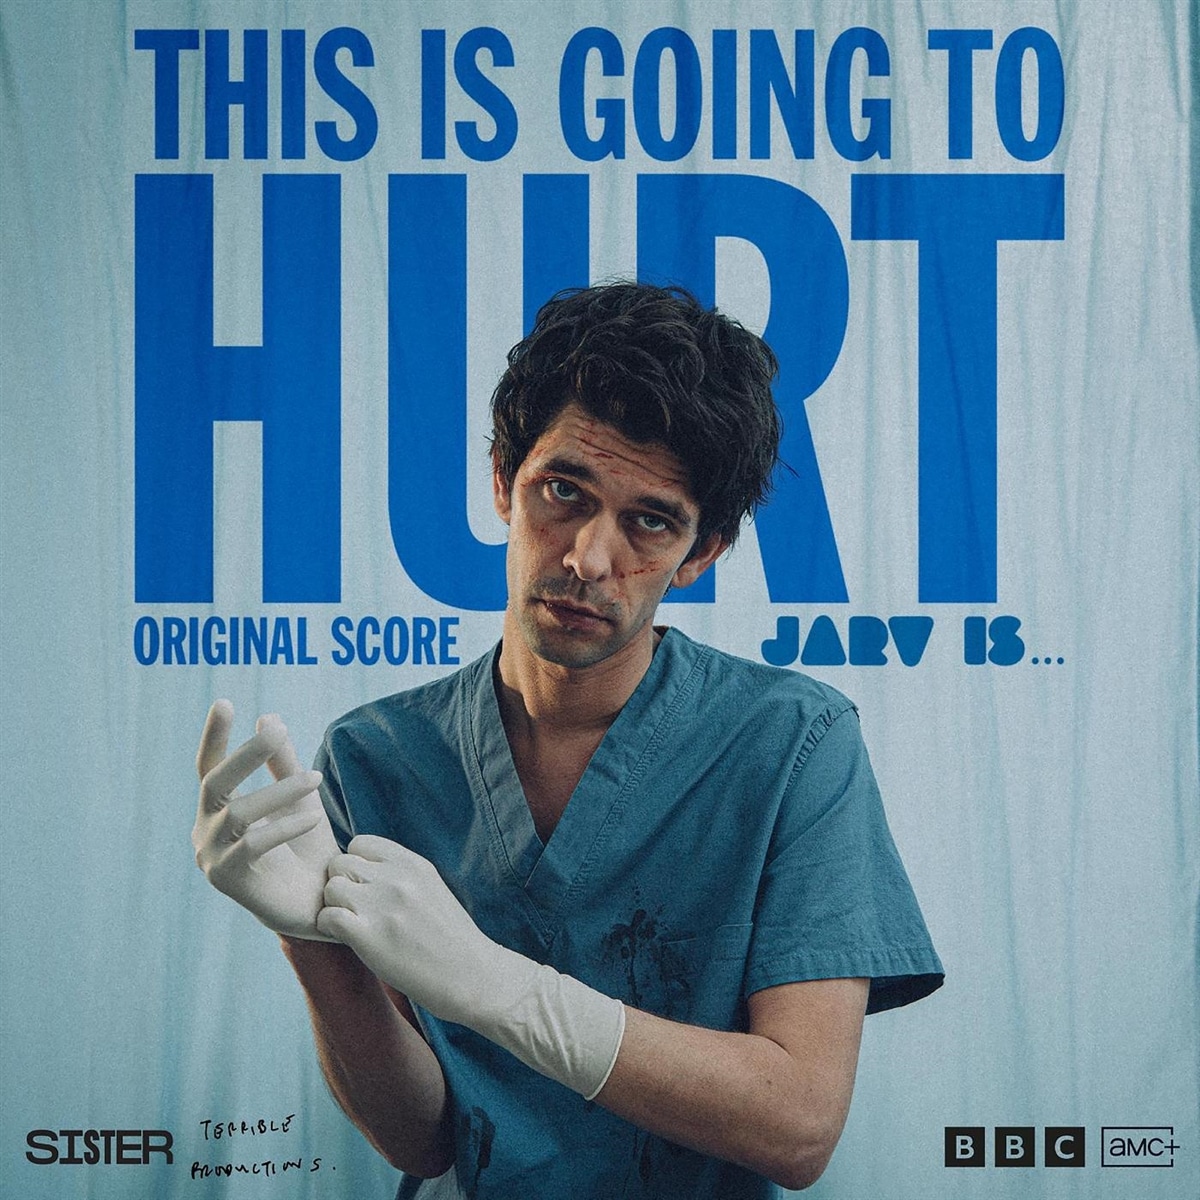 JARV IS - This is going to hurt (Original Score)